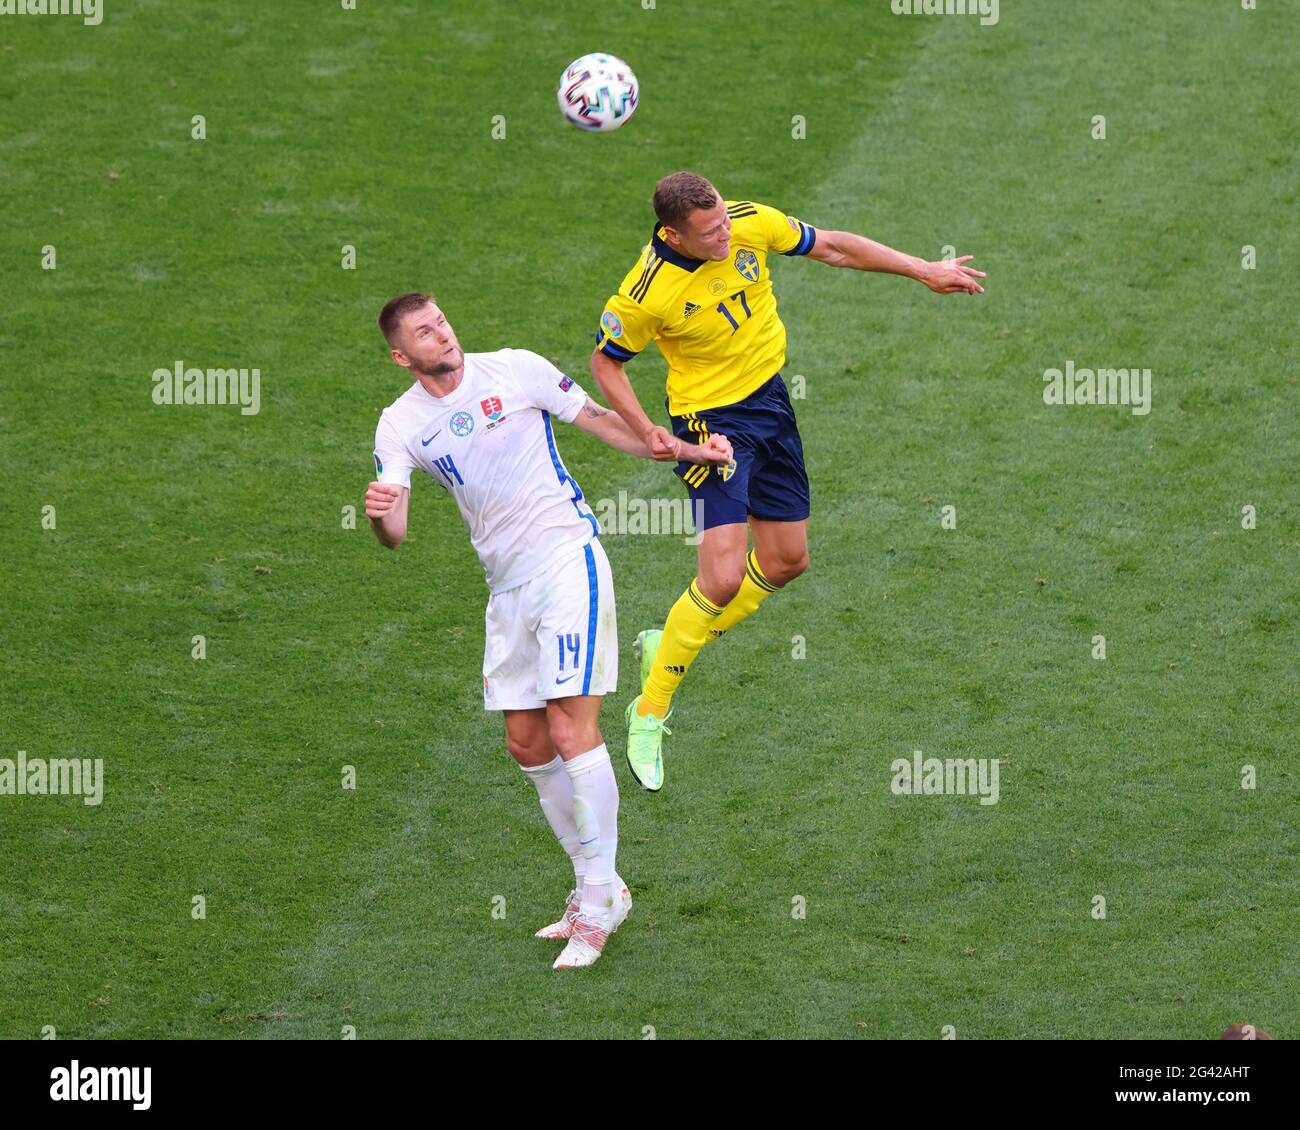 Saint Petersburg, Russia. 18th June, 2021. Viktor Claesson (17) of Sweden and Milan Skriniar (14) of Slovakia in action during the European championship EURO 2020 between Sweden and Slovakia at Gazprom Arena. (Final Score; Sweden 1:0 Slovakia). (Photo by Maksim Konstantinov/SOPA Image/Sipa USA) Credit: Sipa USA/Alamy Live News Stock Photo